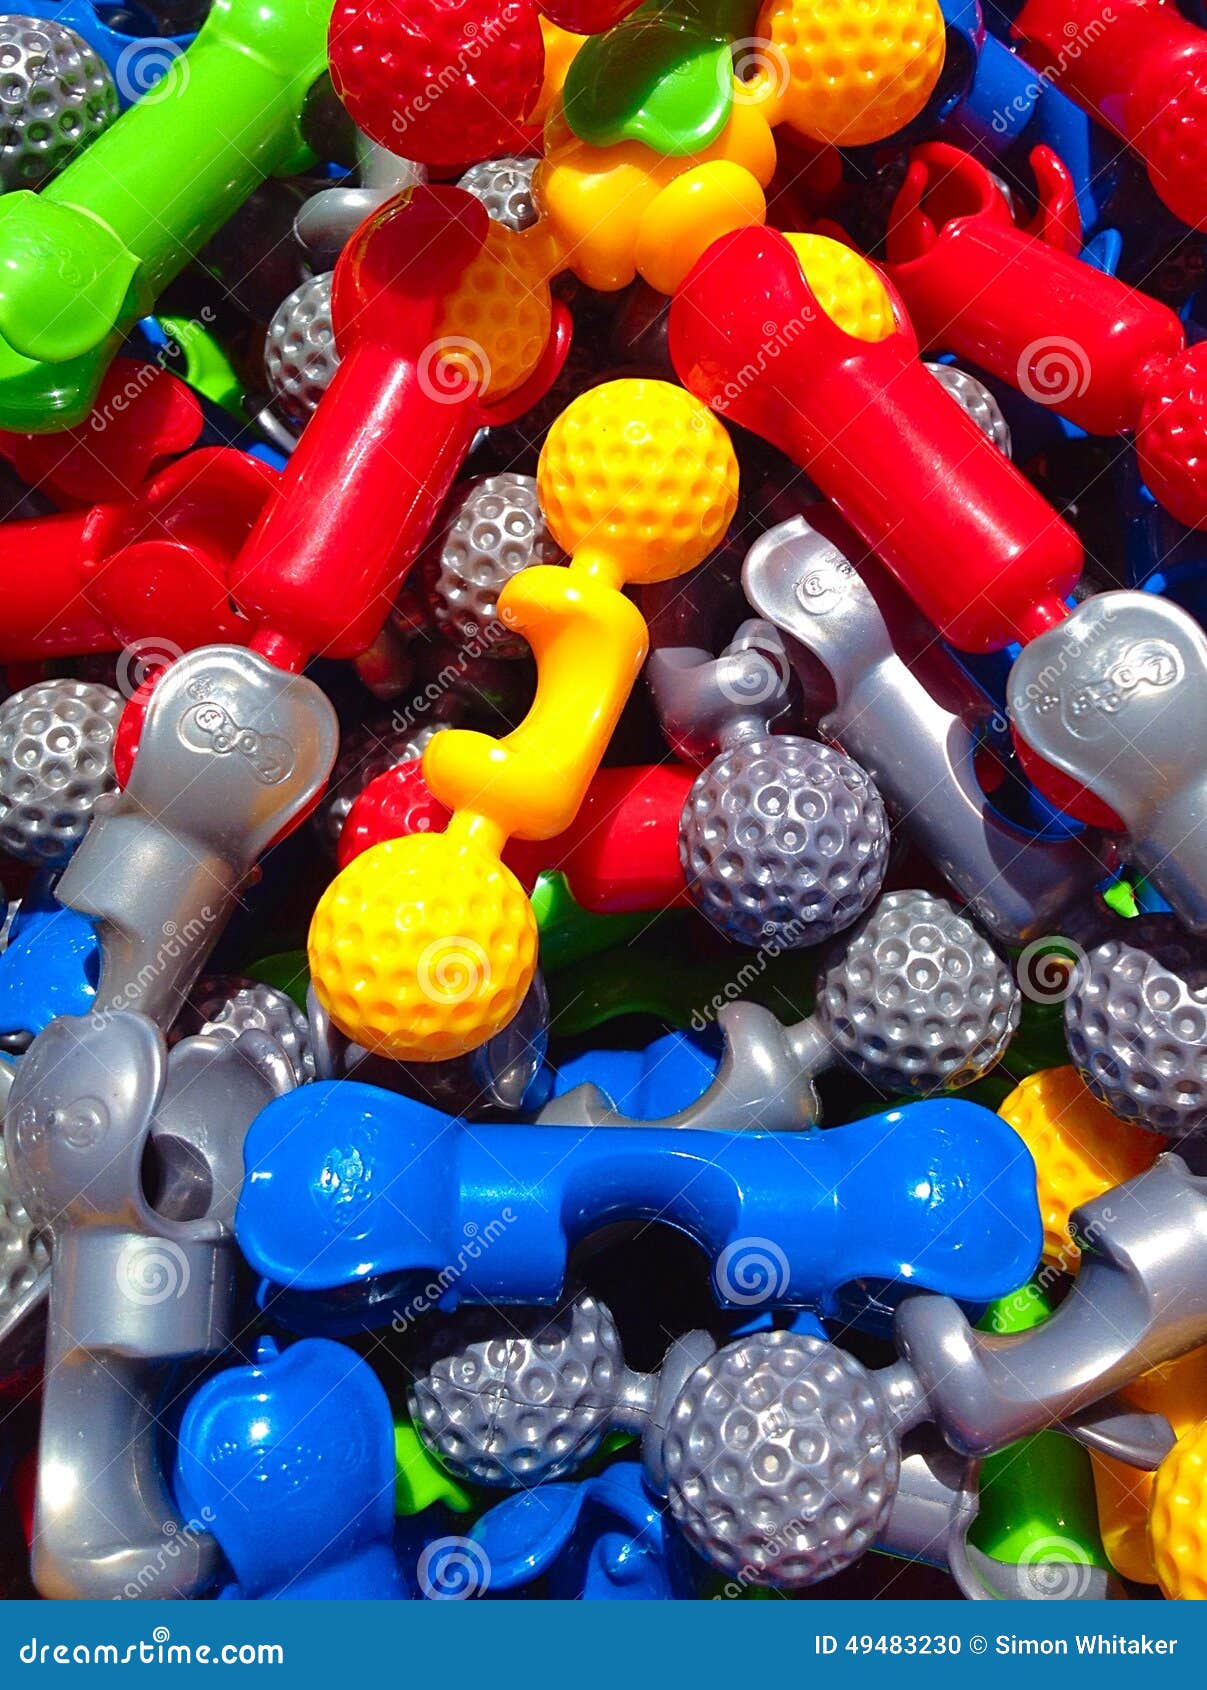 plastic connector toys